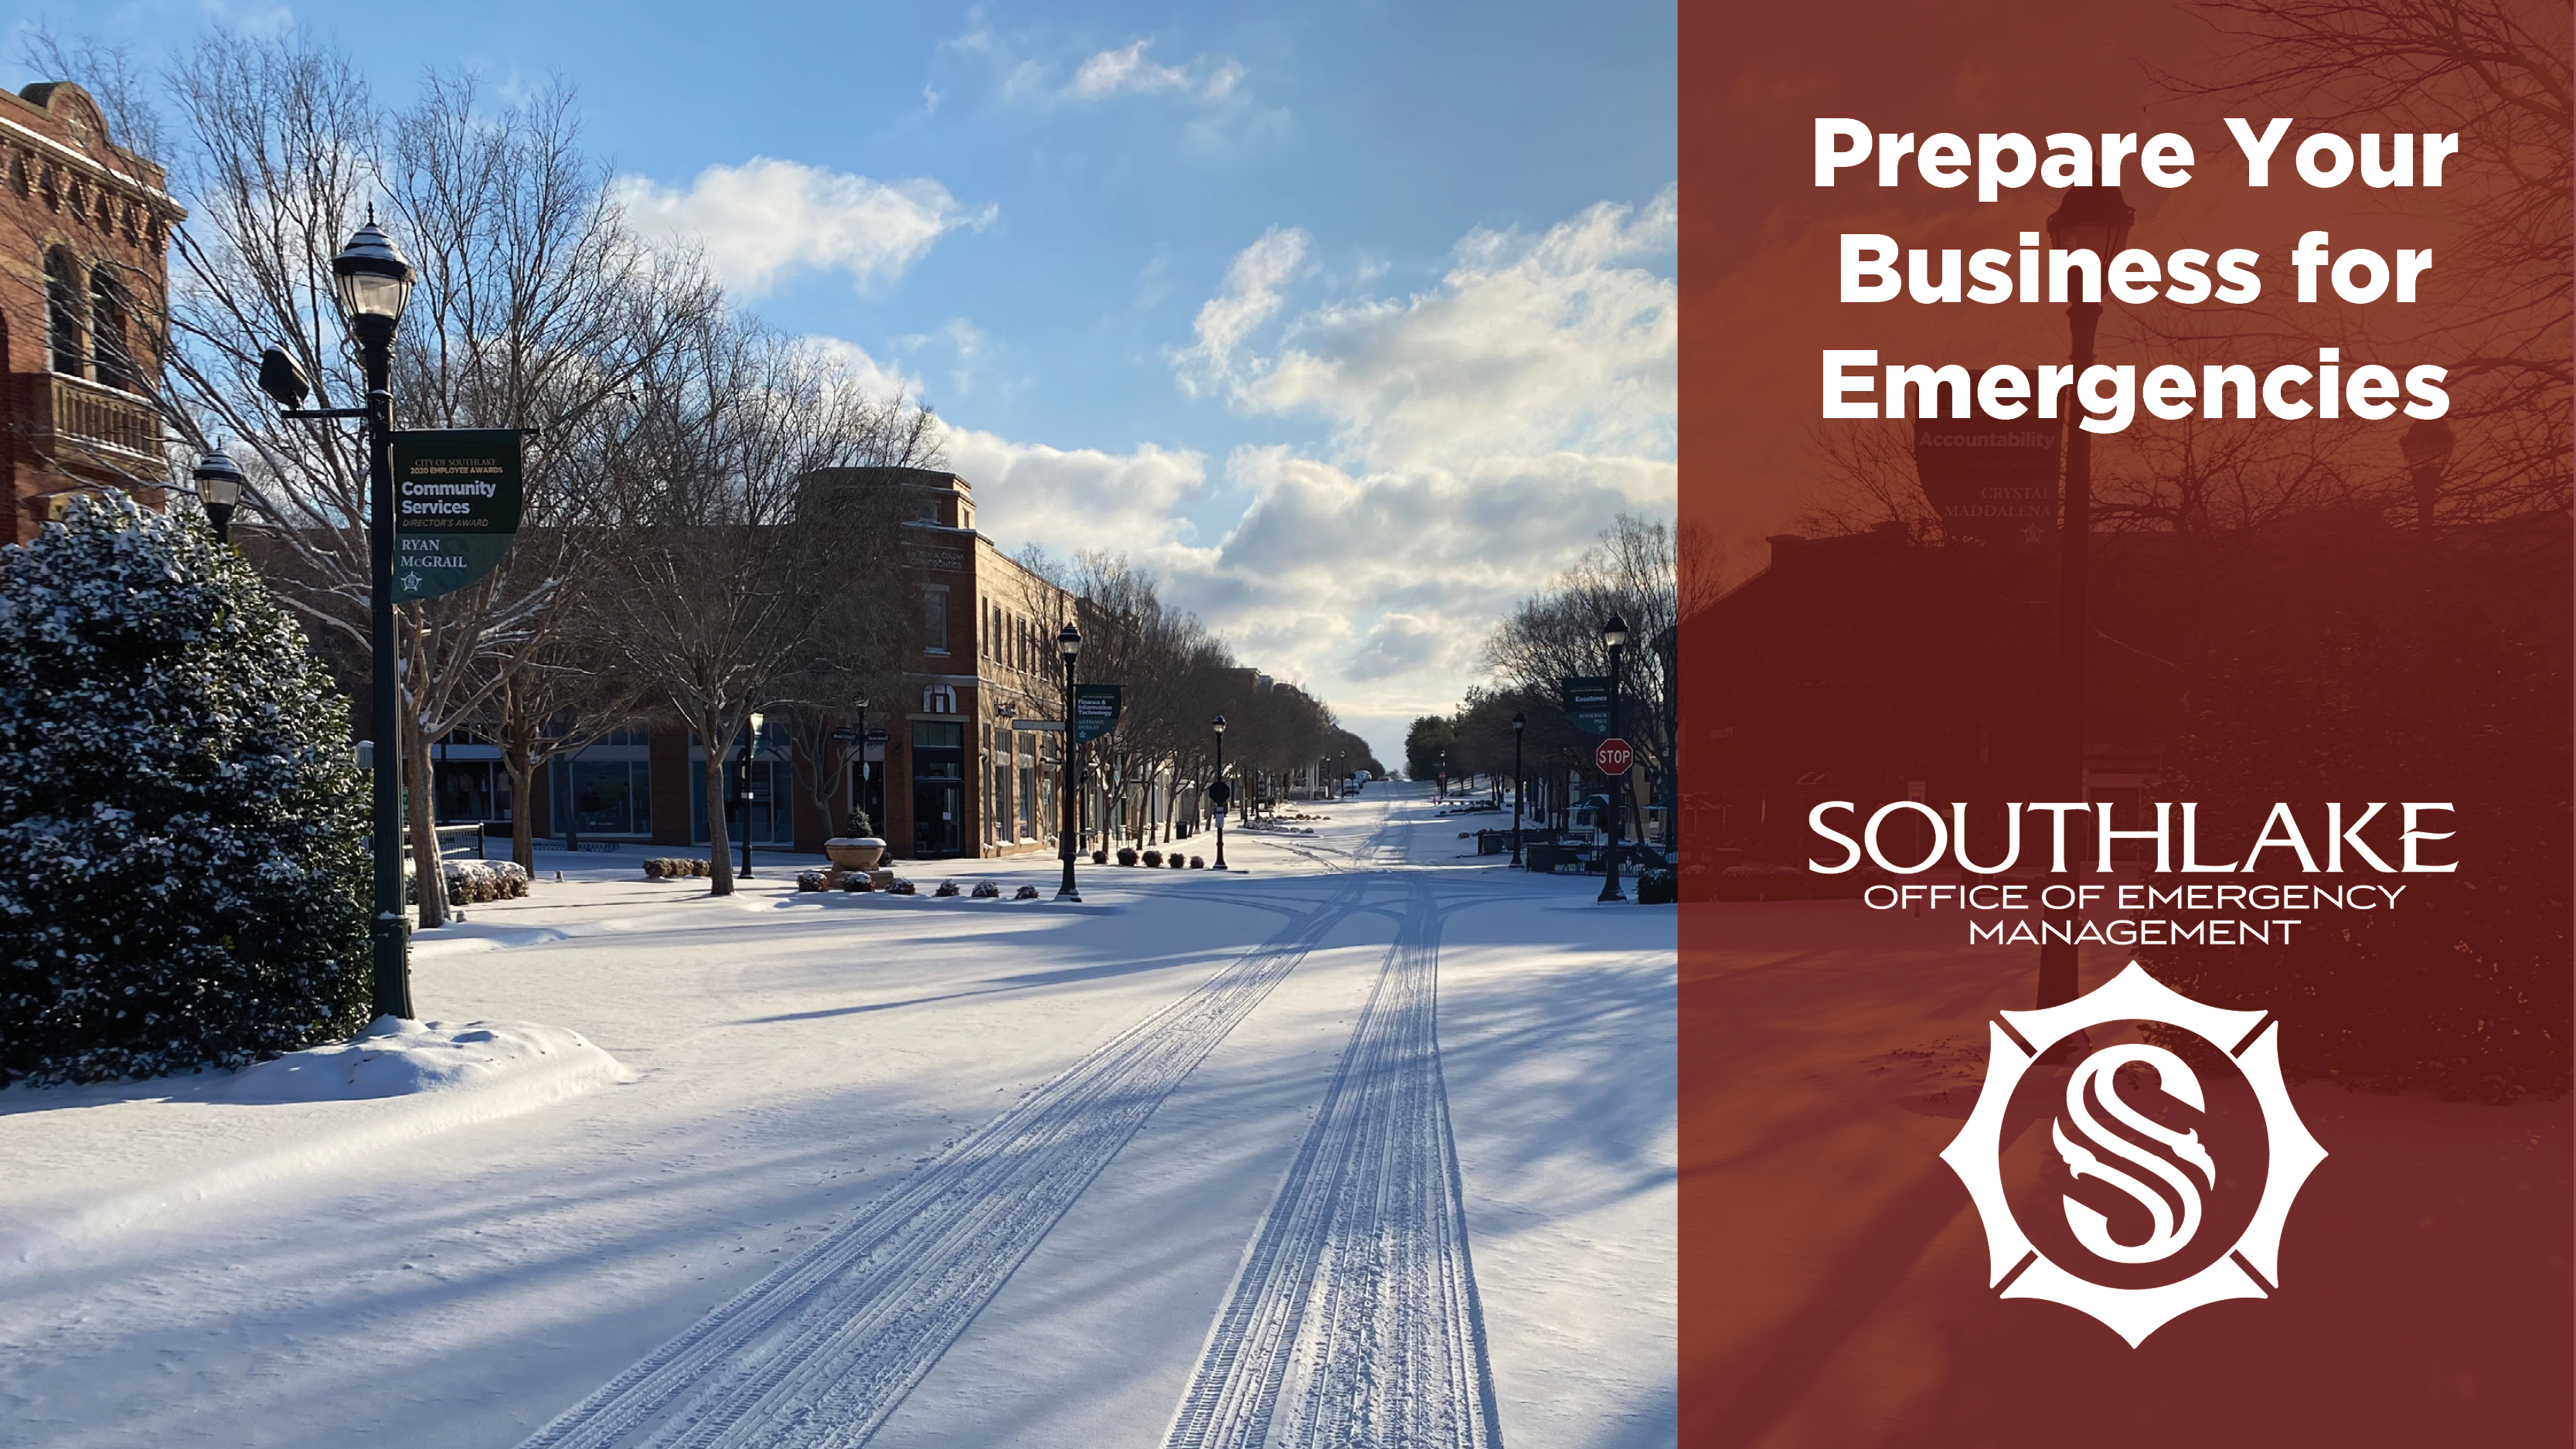 Prepare Your Business for Emergencies with photo of snow covered street